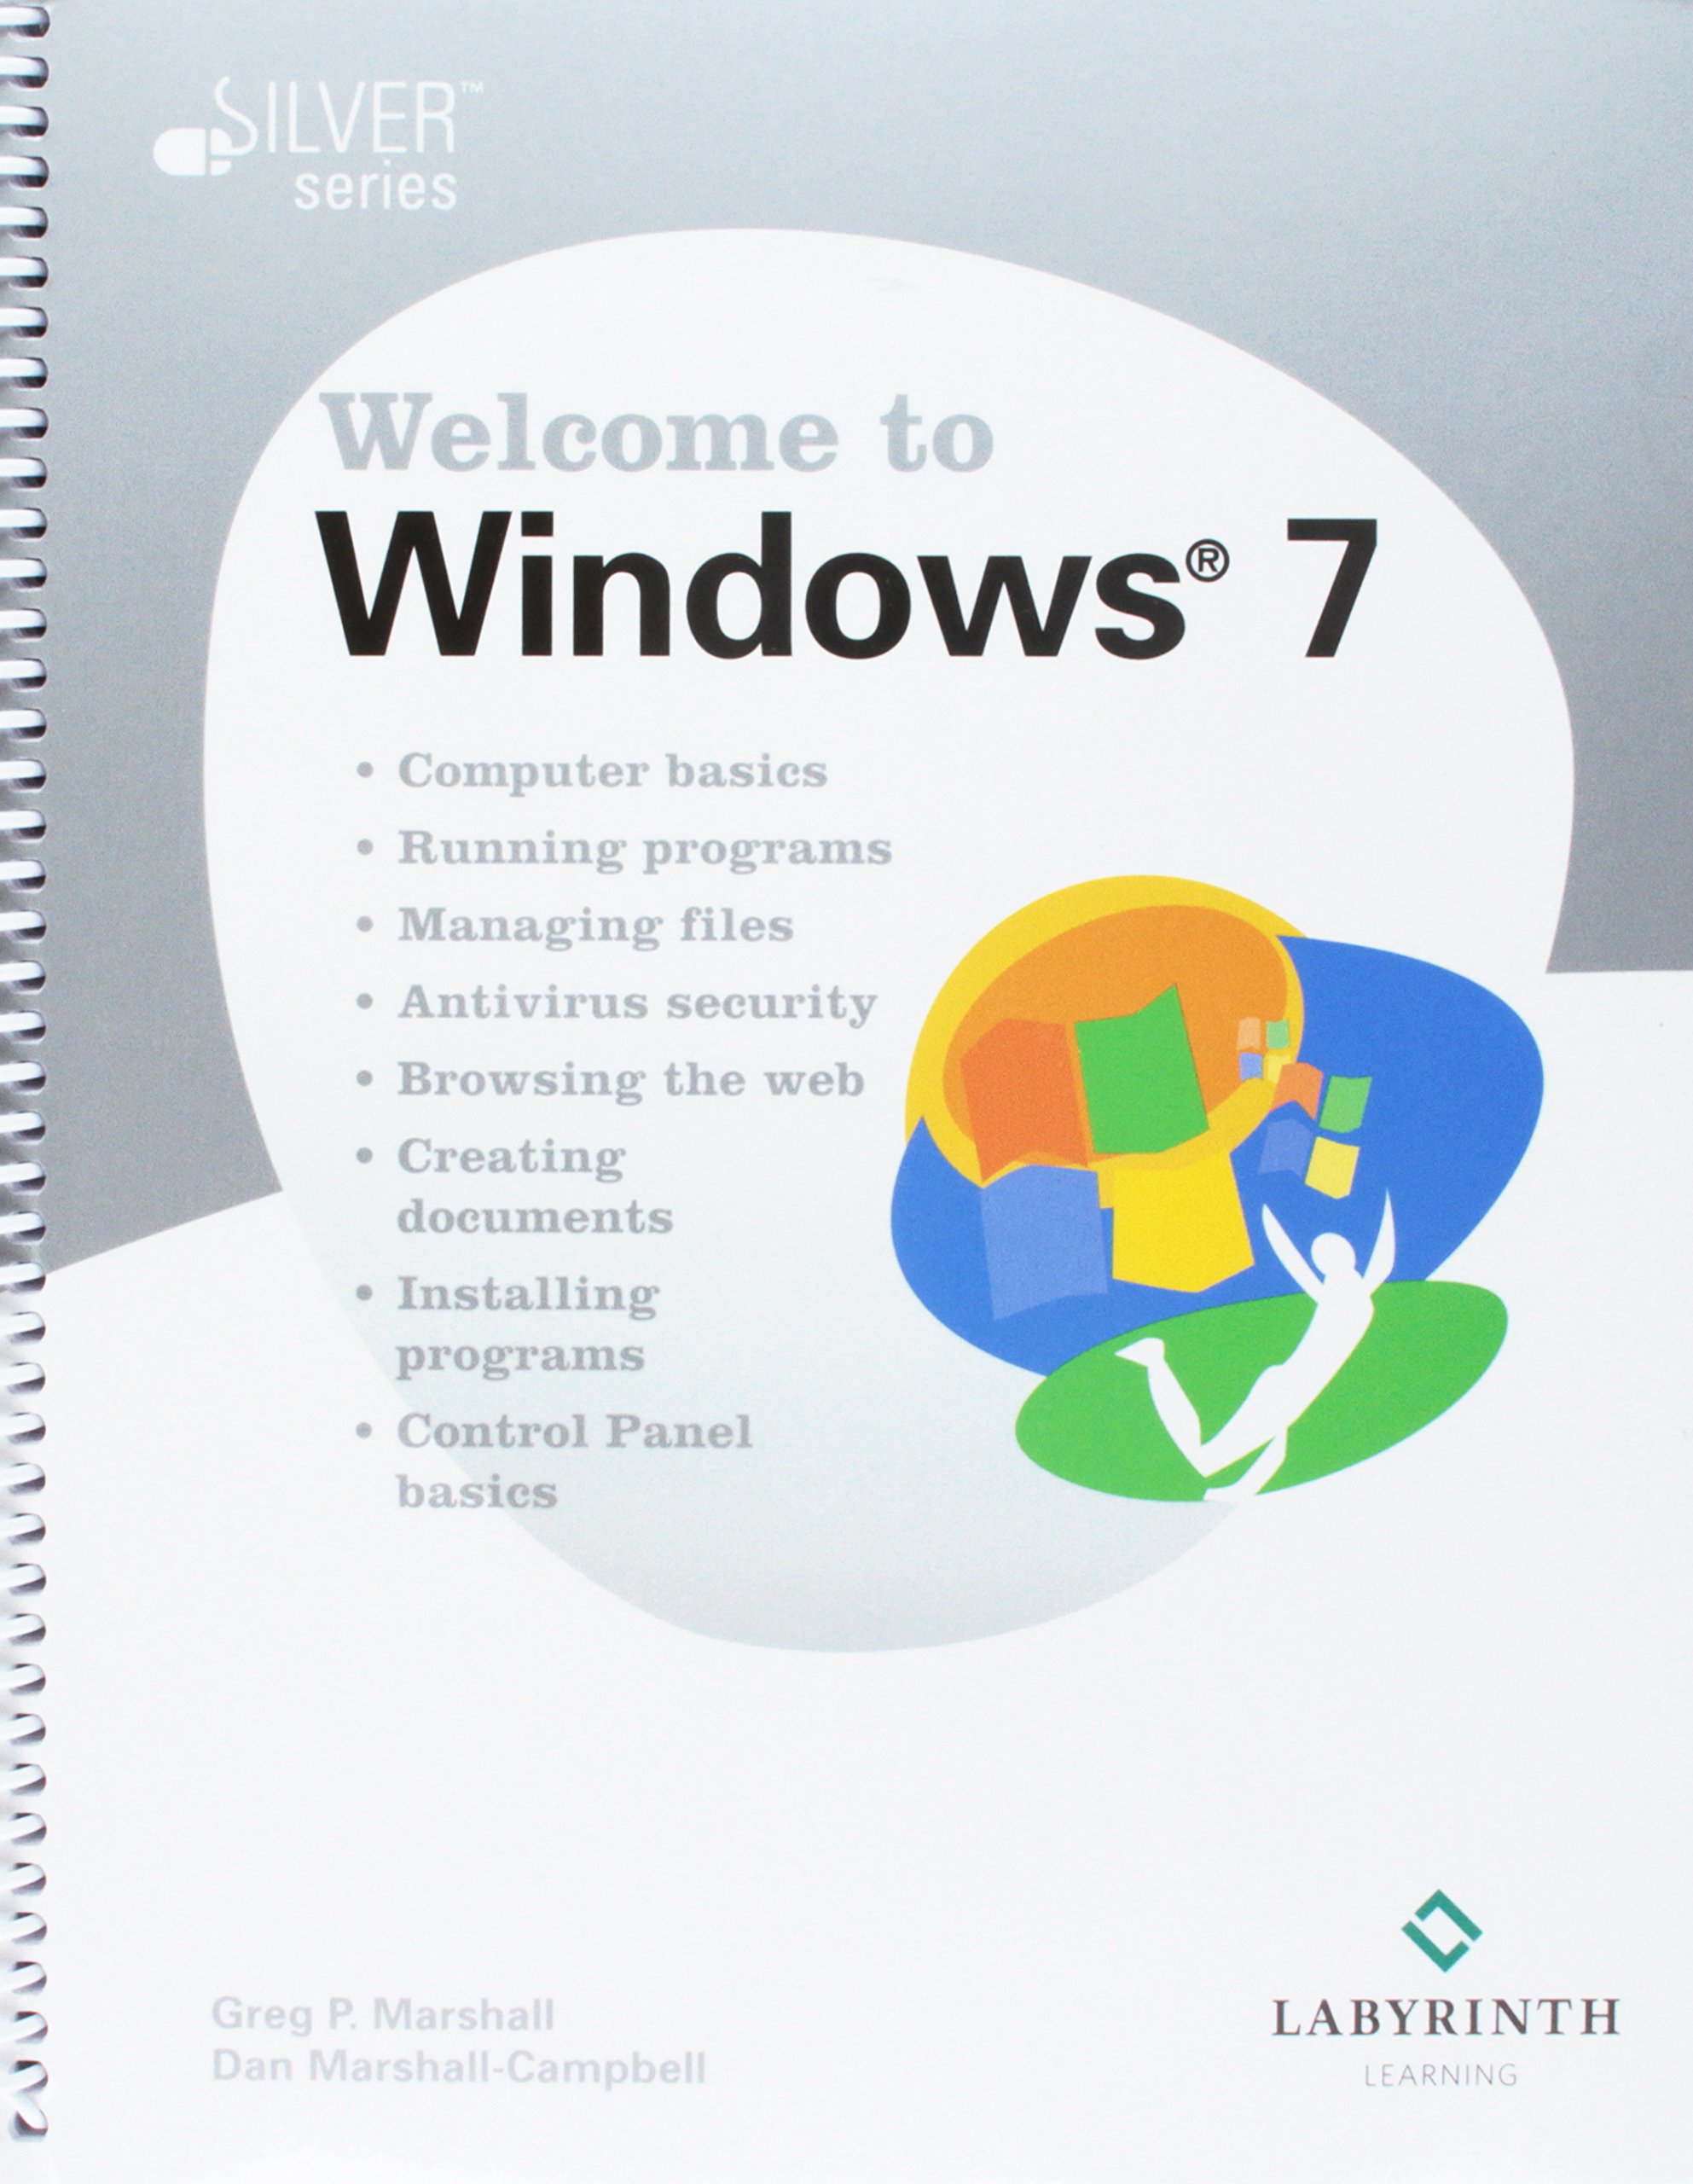 Introduction to Operating Systems: Welcome to Windows 7